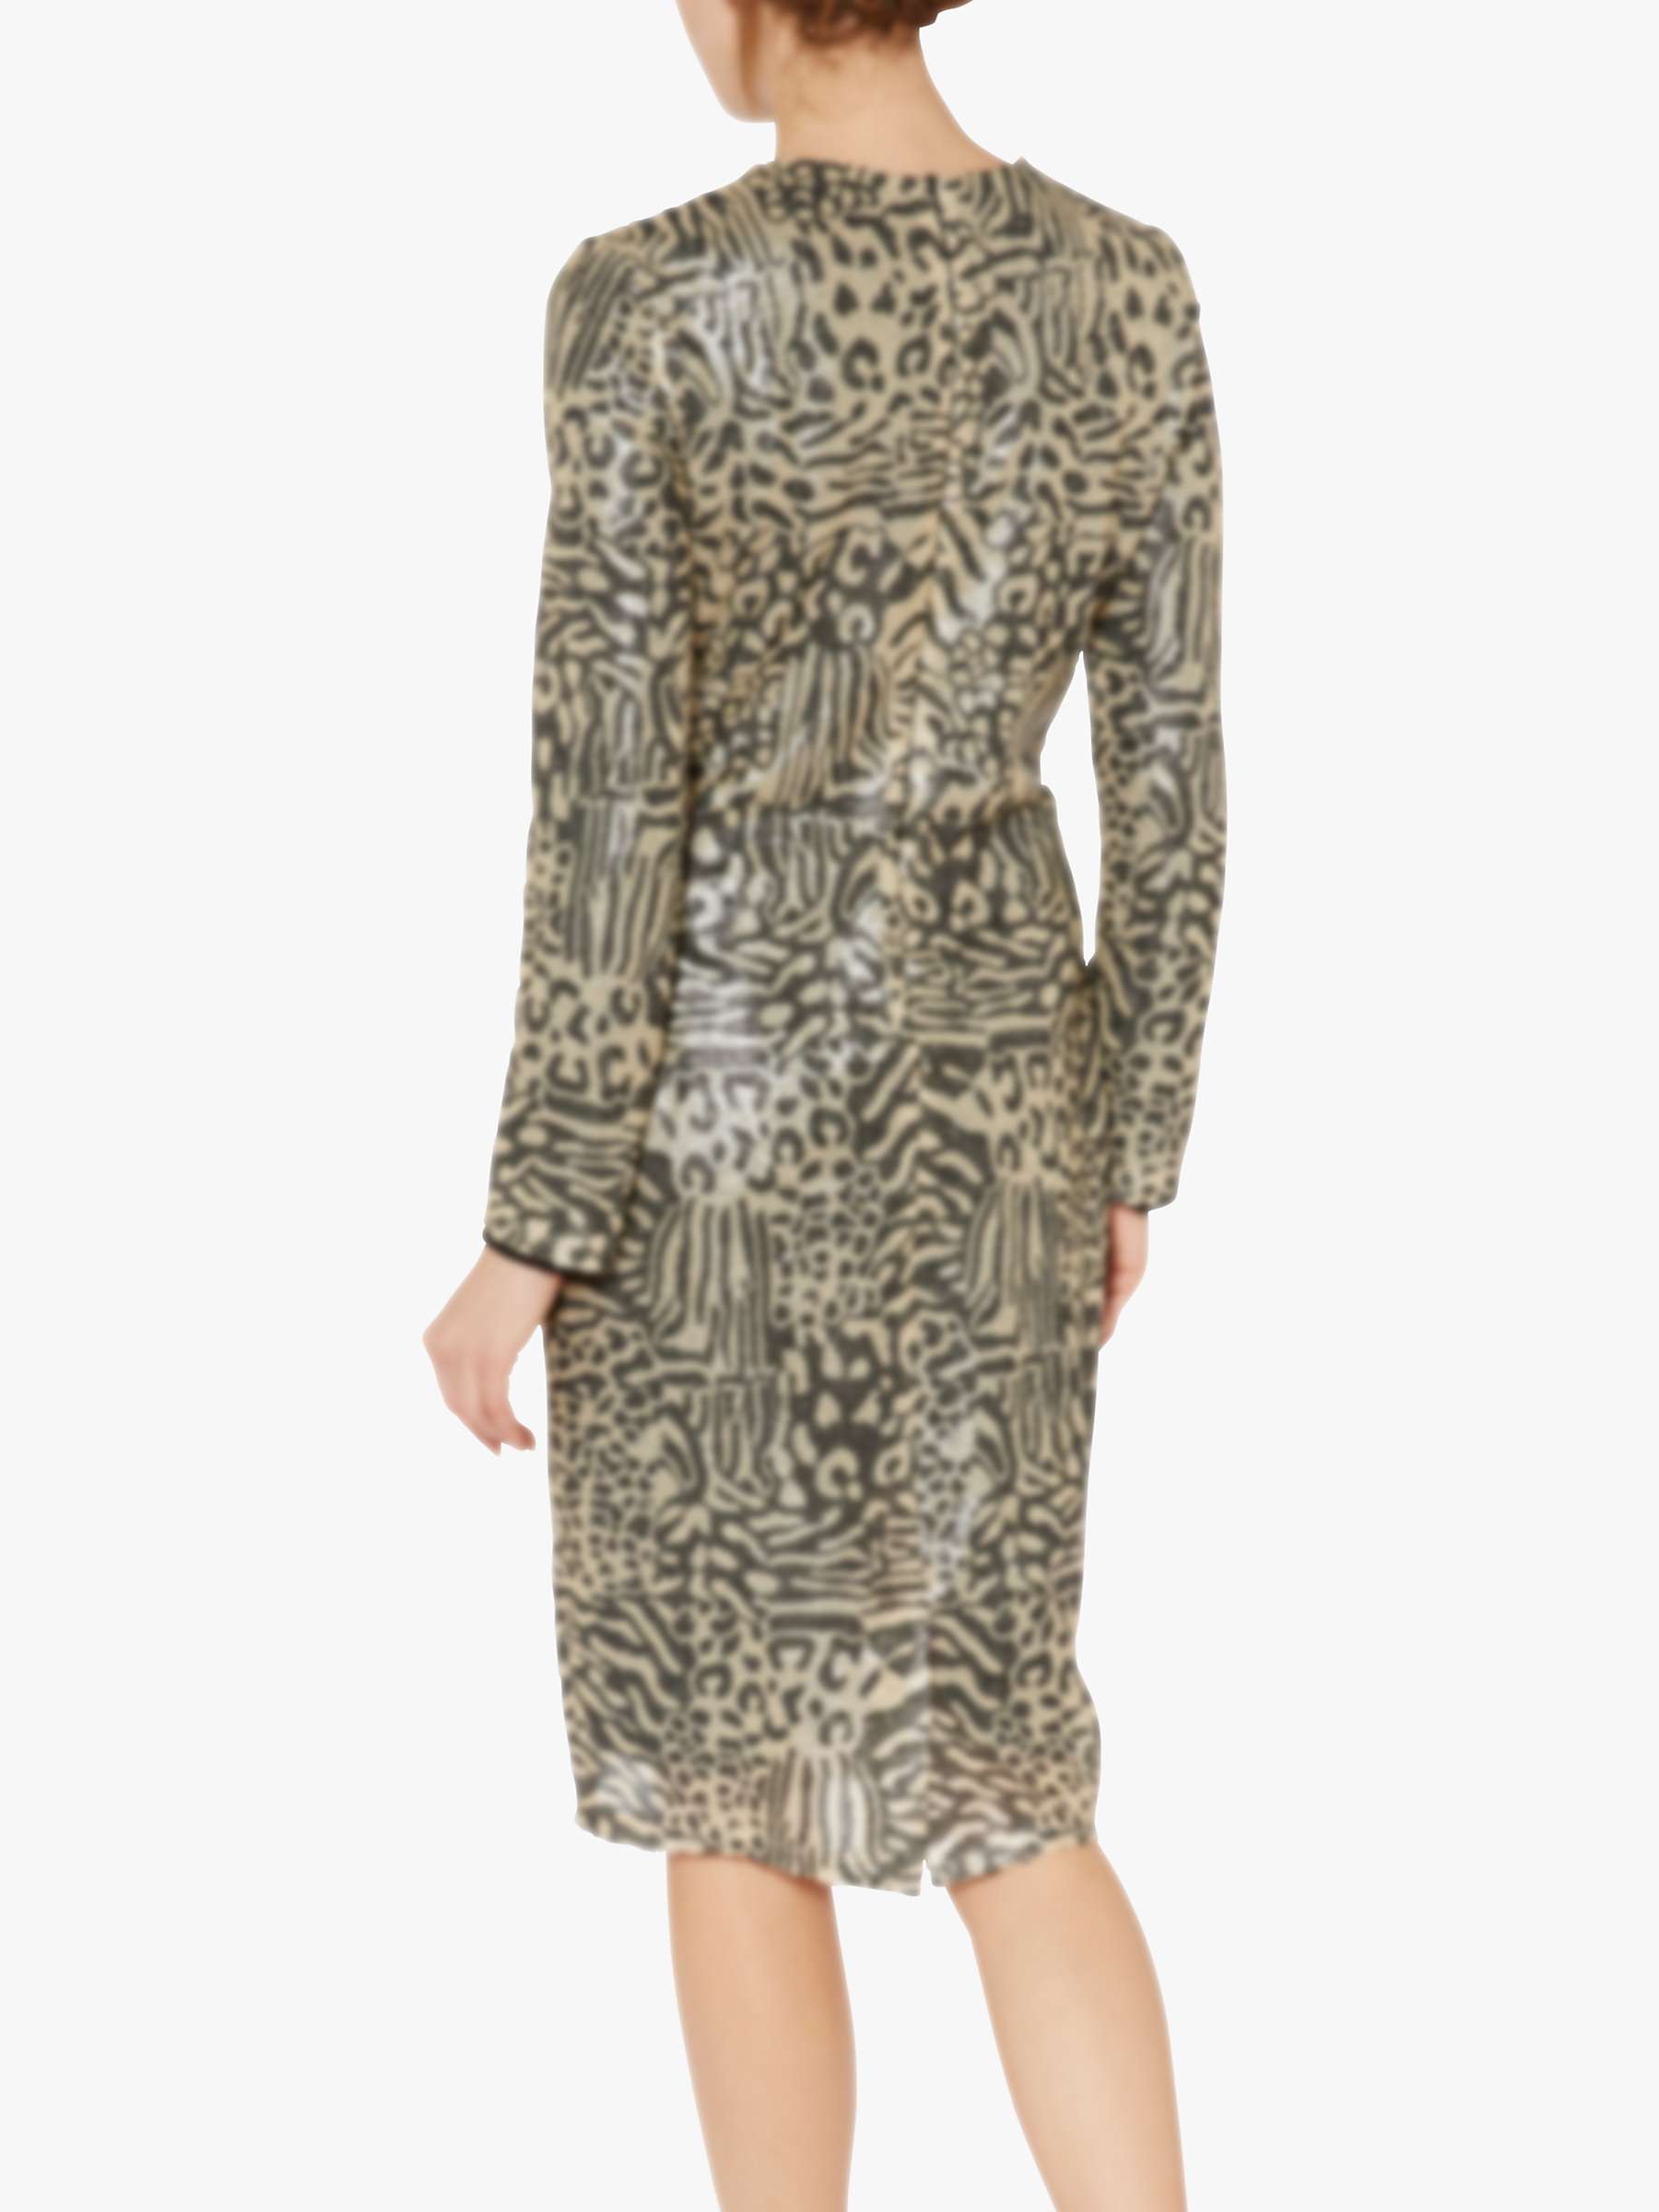 Buy Gina Bacconi Ceri Abstract Animal Sequin Dress, Neutral Online at johnlewis.com